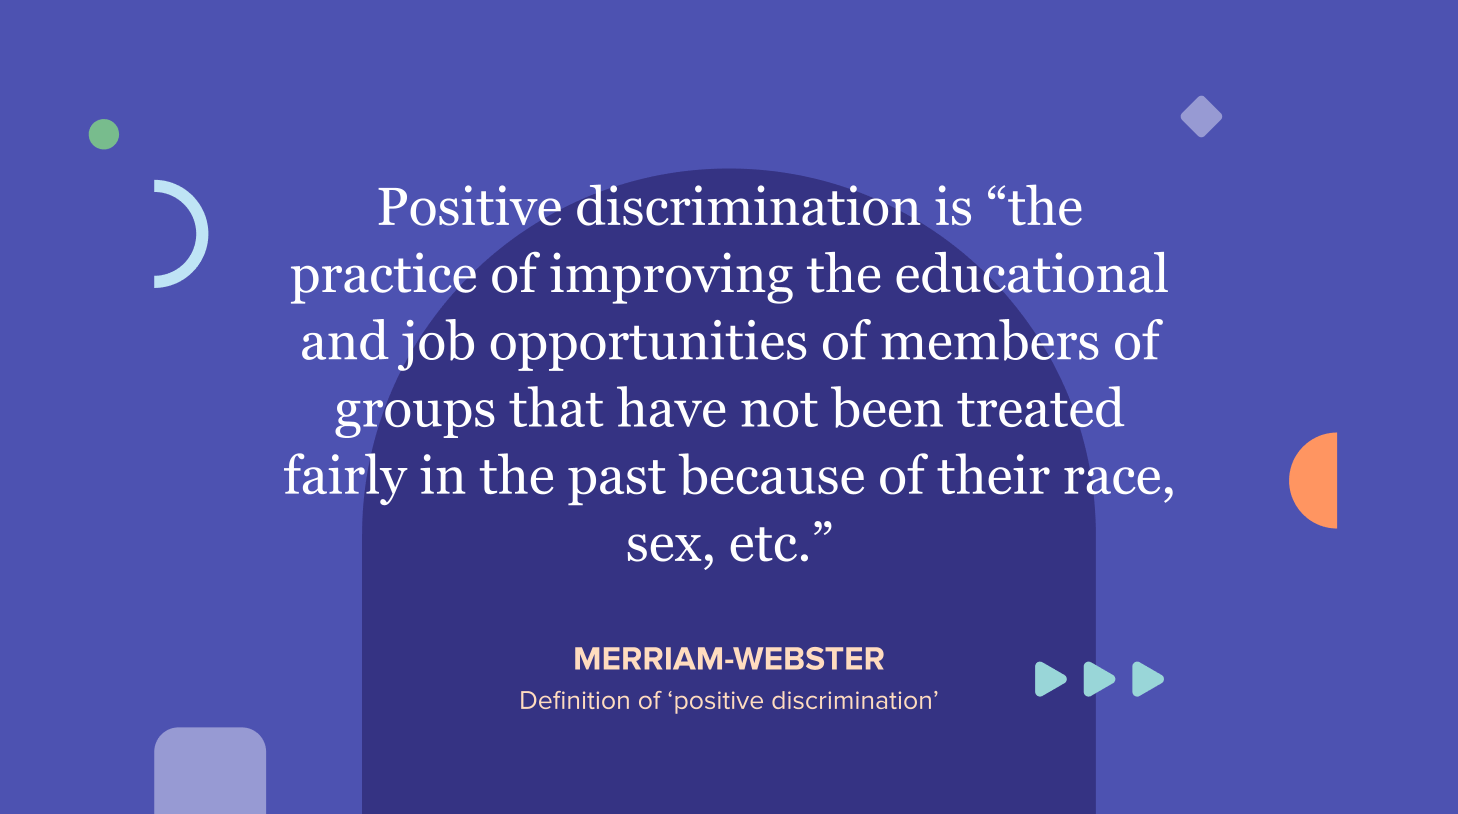 definition of positive discrimination: "the practice of improving the educational and job opportunities of members of groups that have not been treated fairly in the past because of their race, sex, etc." according to Merriam-Webster